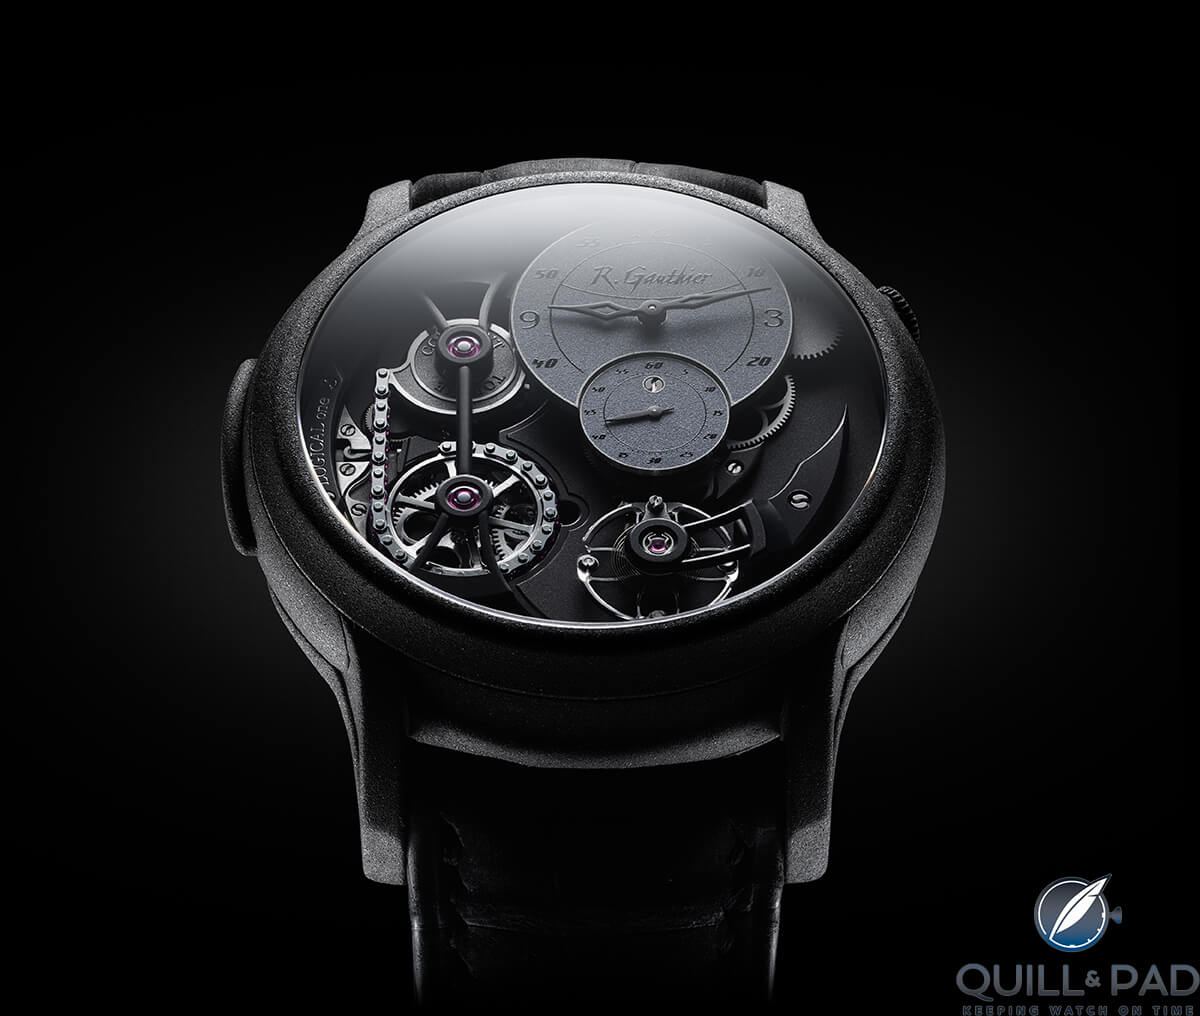 Romain Gauthier's Logical One Engraged Black